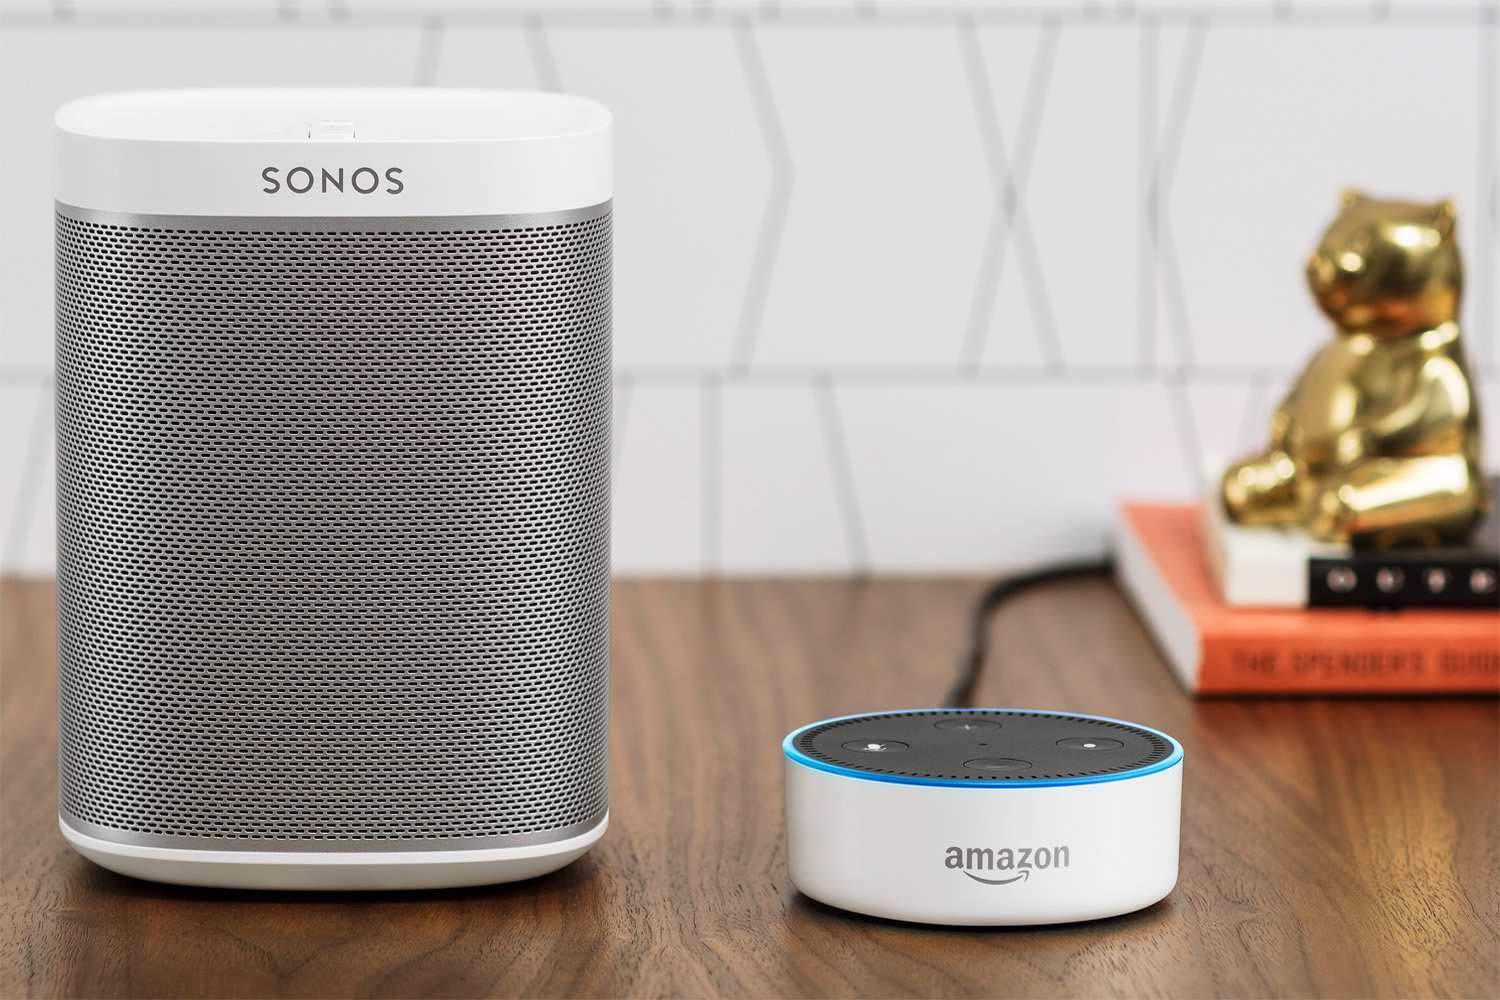 How To Connect Amazon Echo With Sonos